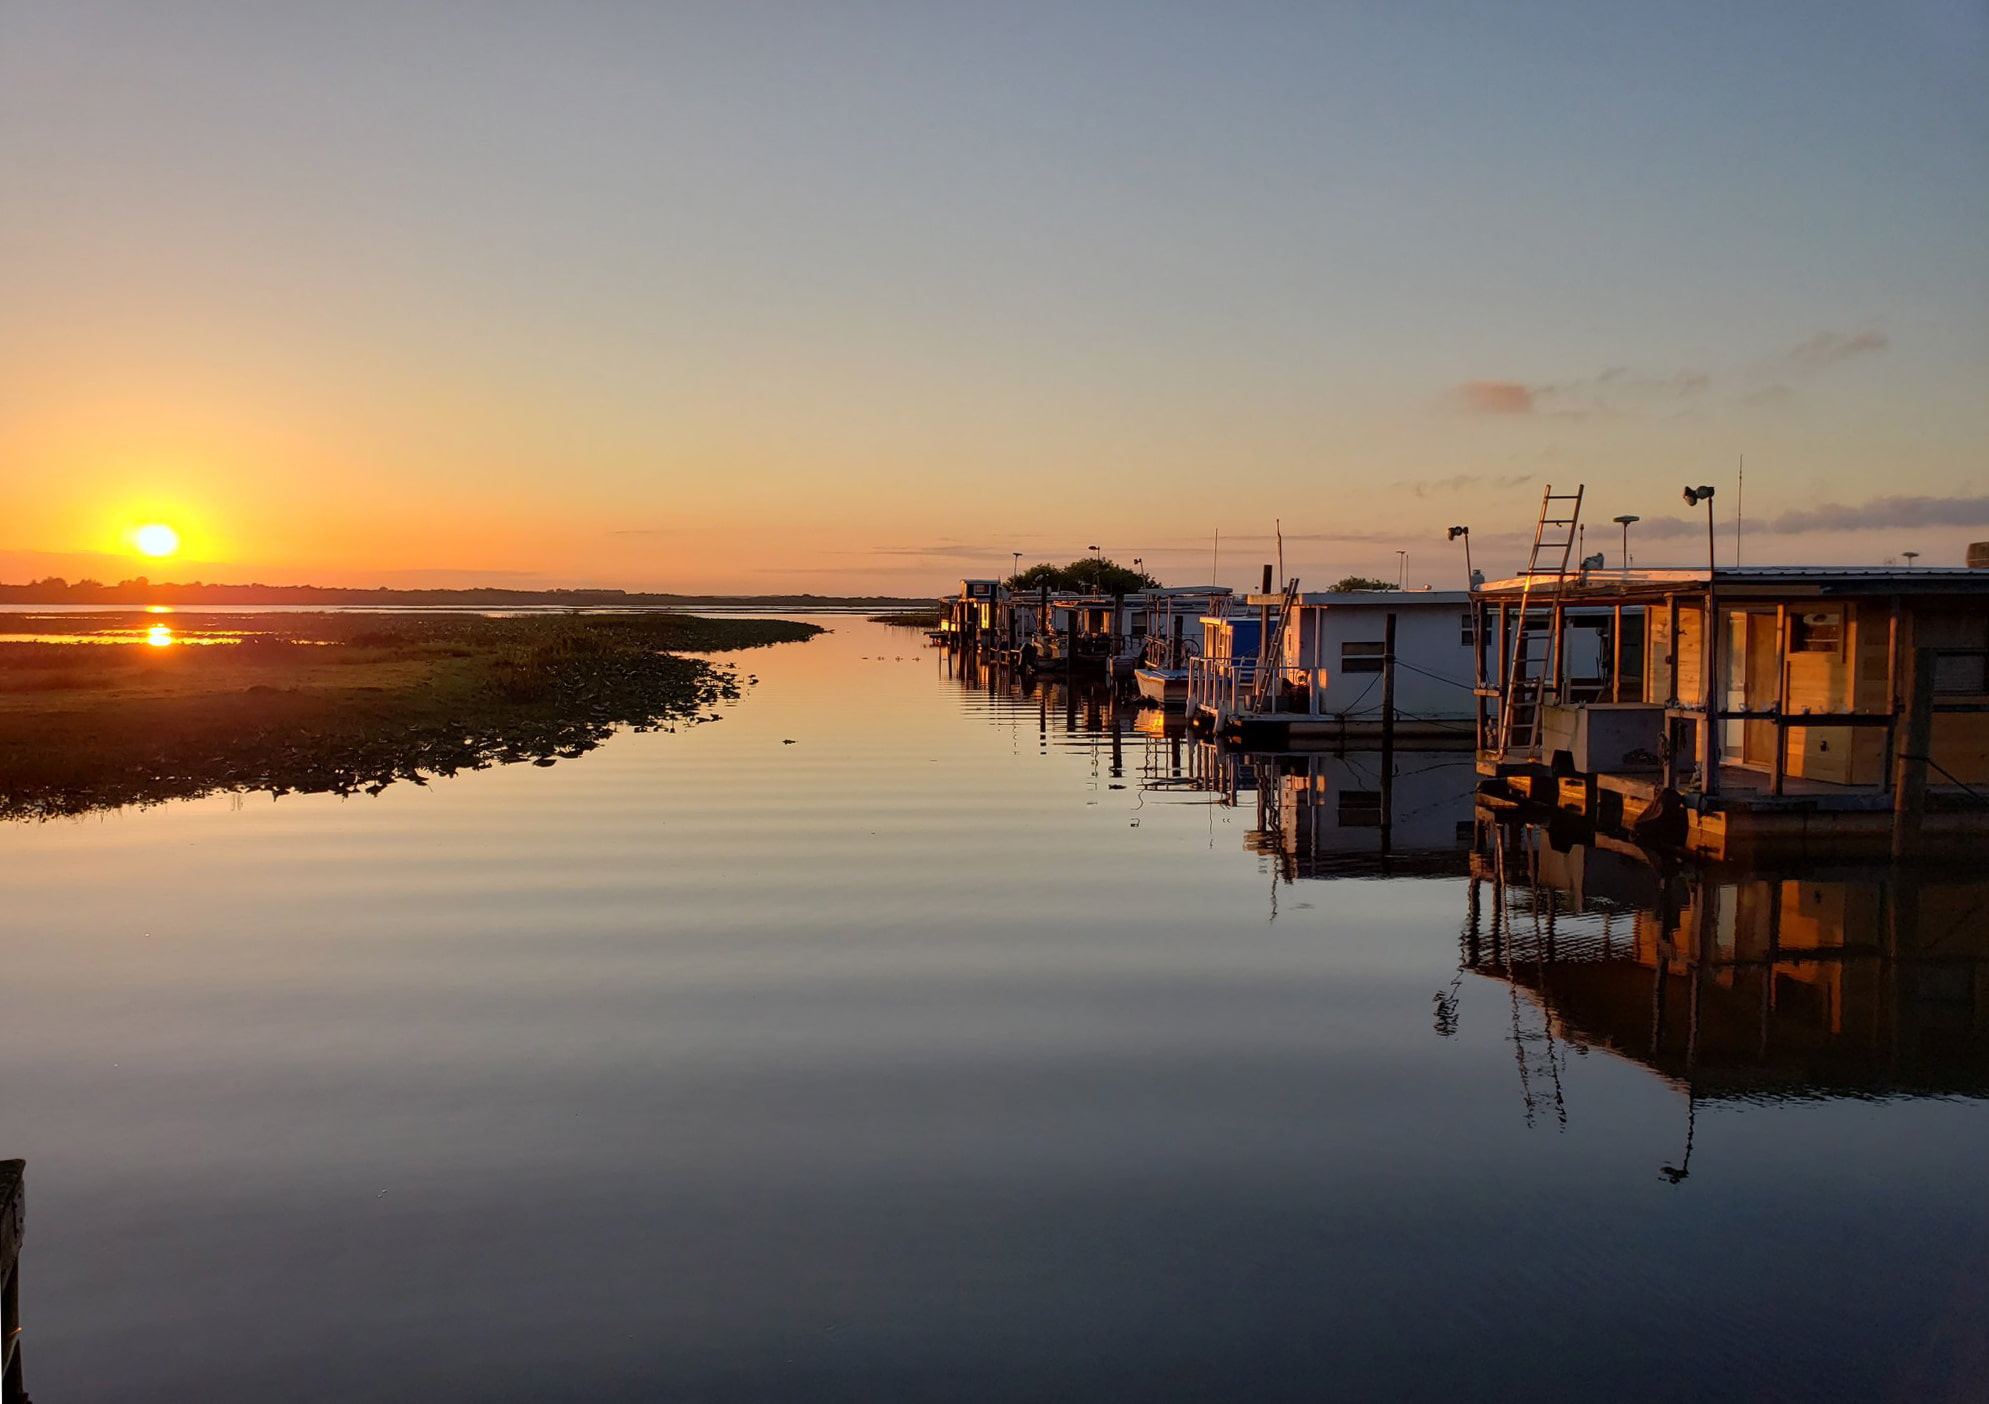 Sunrise over lake and rental cabins at Grape Hammock Fish Camp and Airboat Rides in Lake Wales, FL